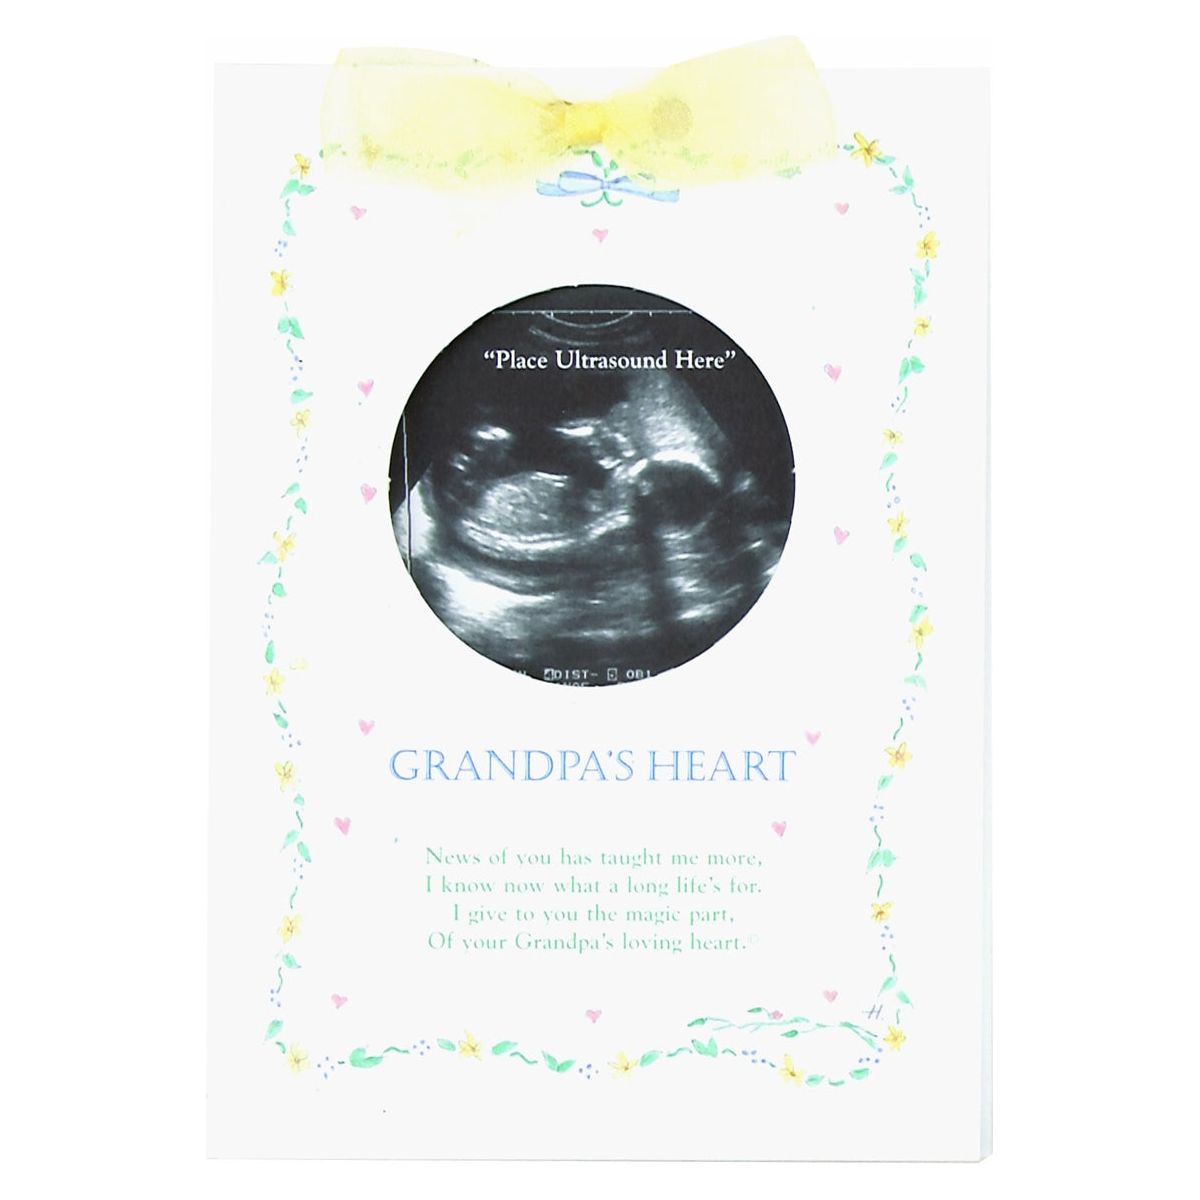 5x7 Grandpa's Heart greeting card with new baby poem, yellow organza accent ribbon, and circular opening for baby's ultrasound picture.